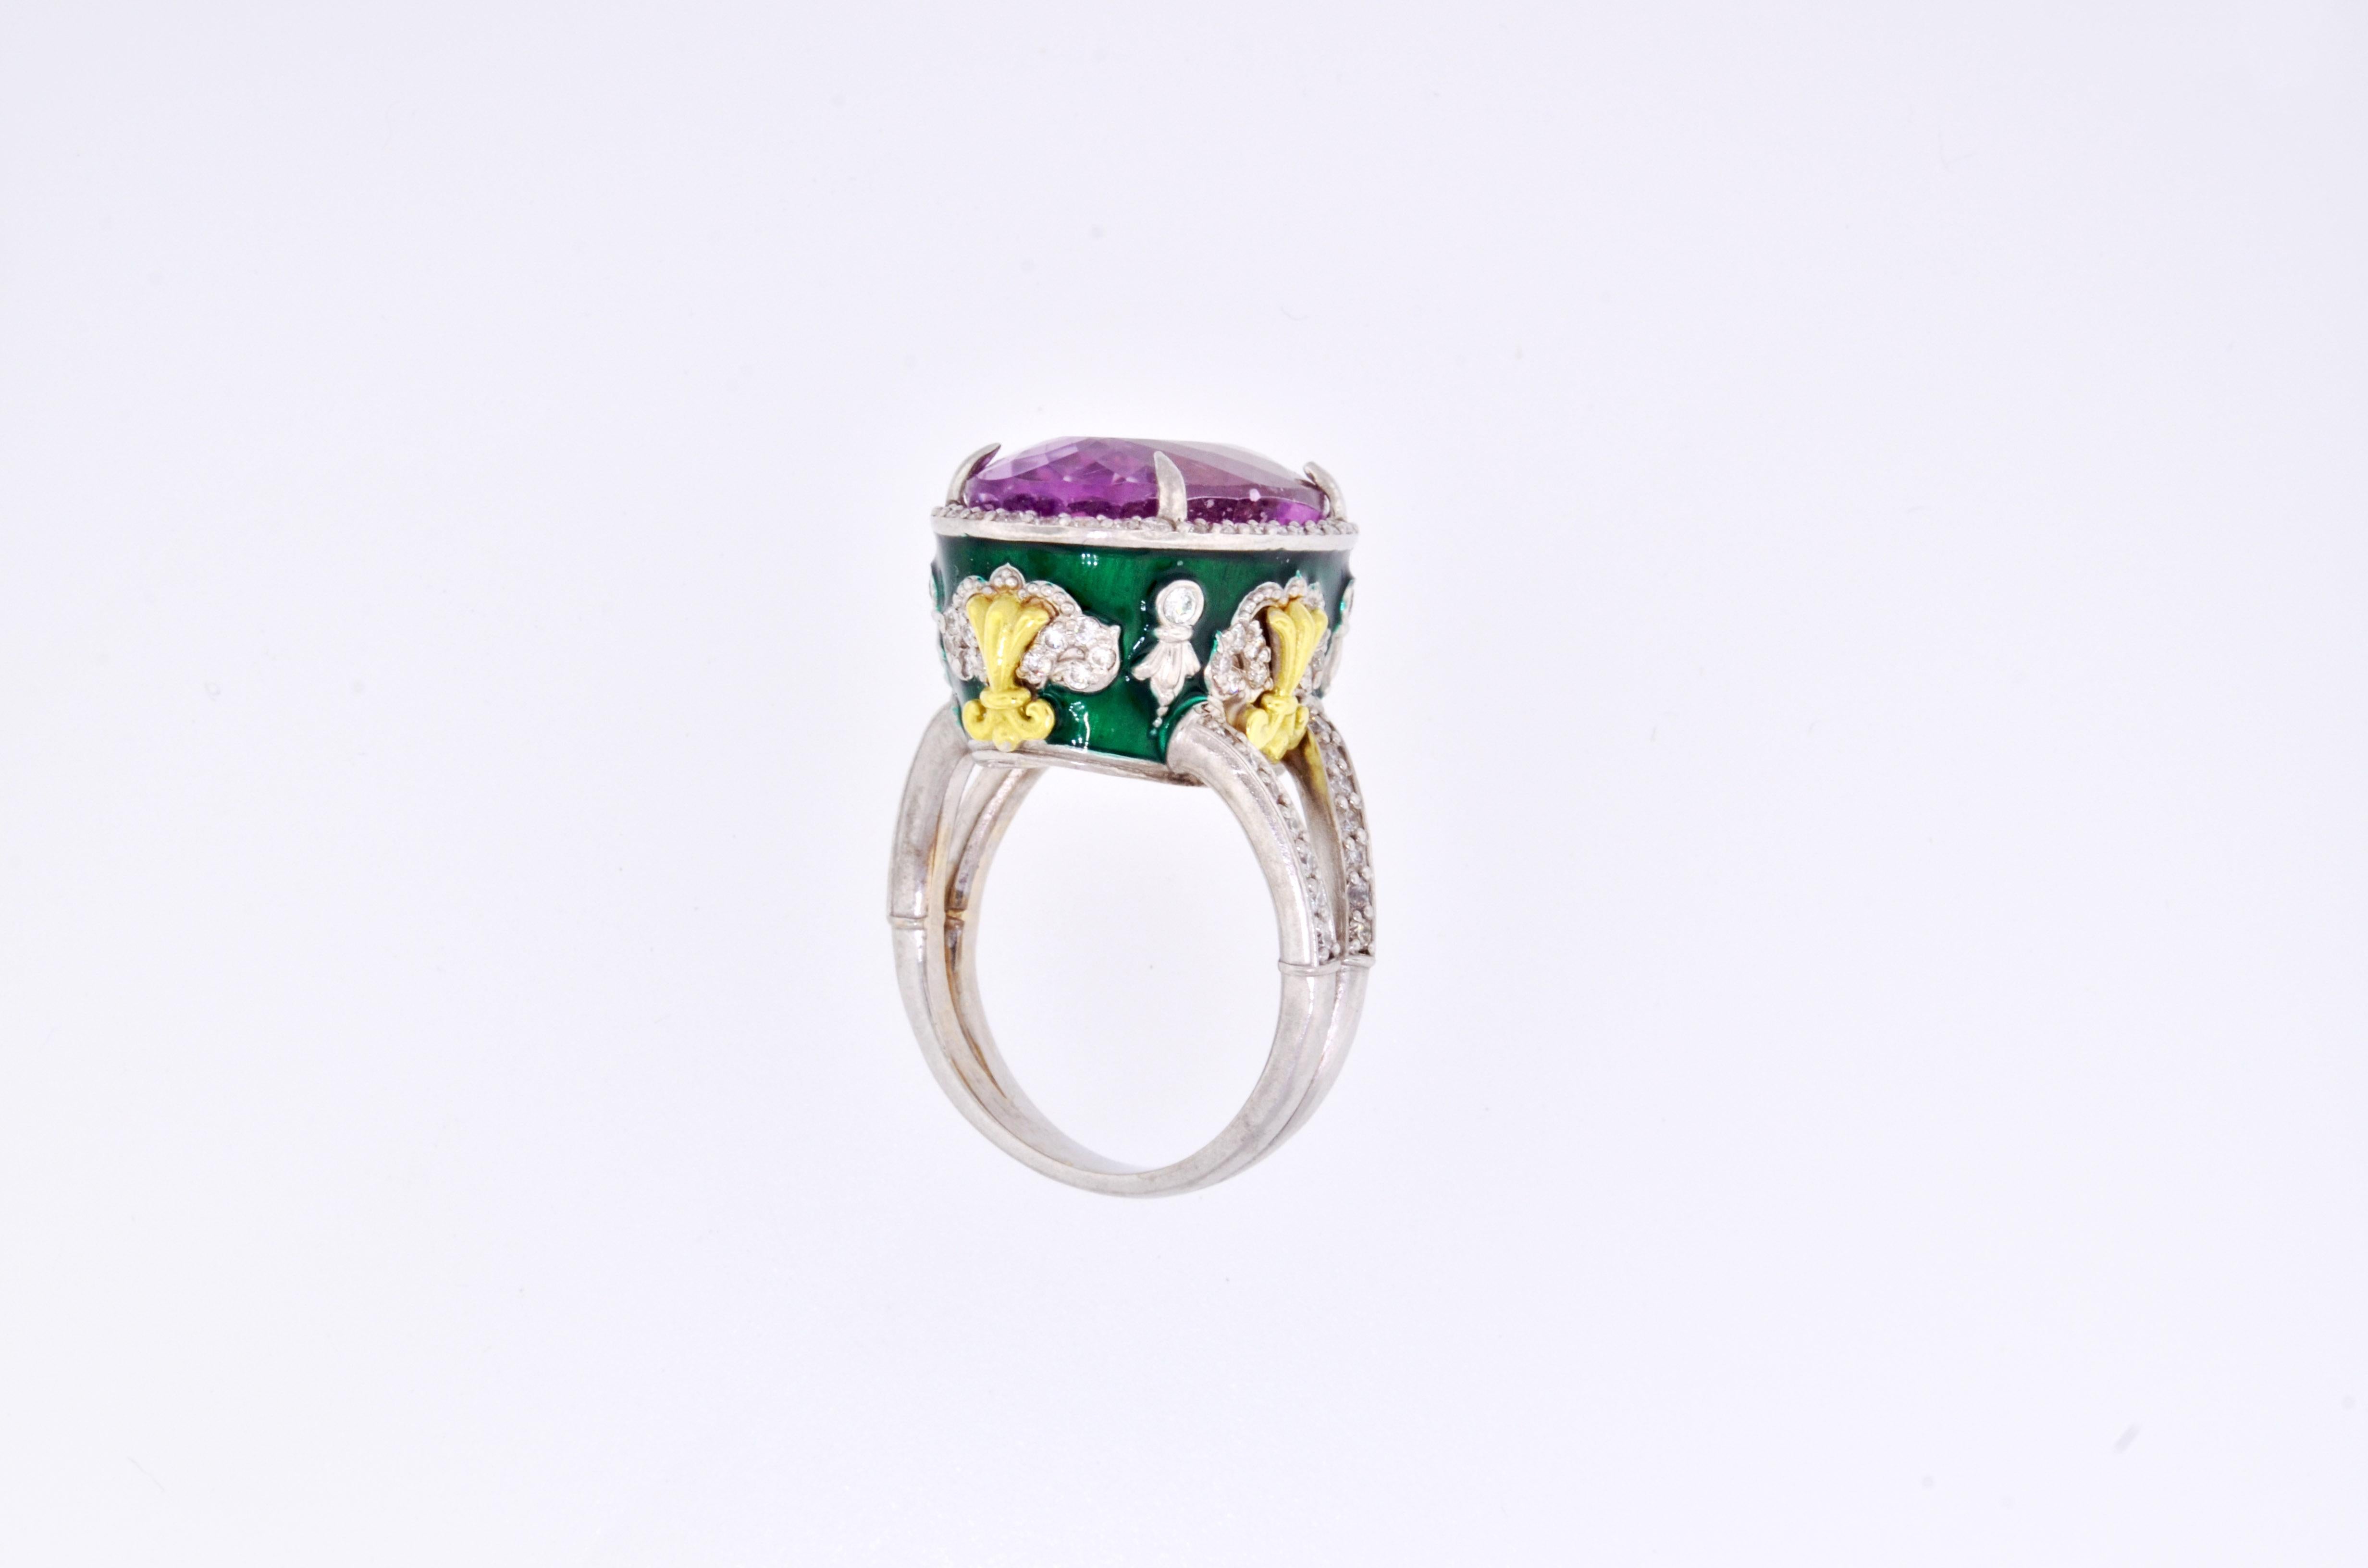 Contemporary Stambolian Oval Kunzite with Diamond Halo and Green Enamel High Profile Ring